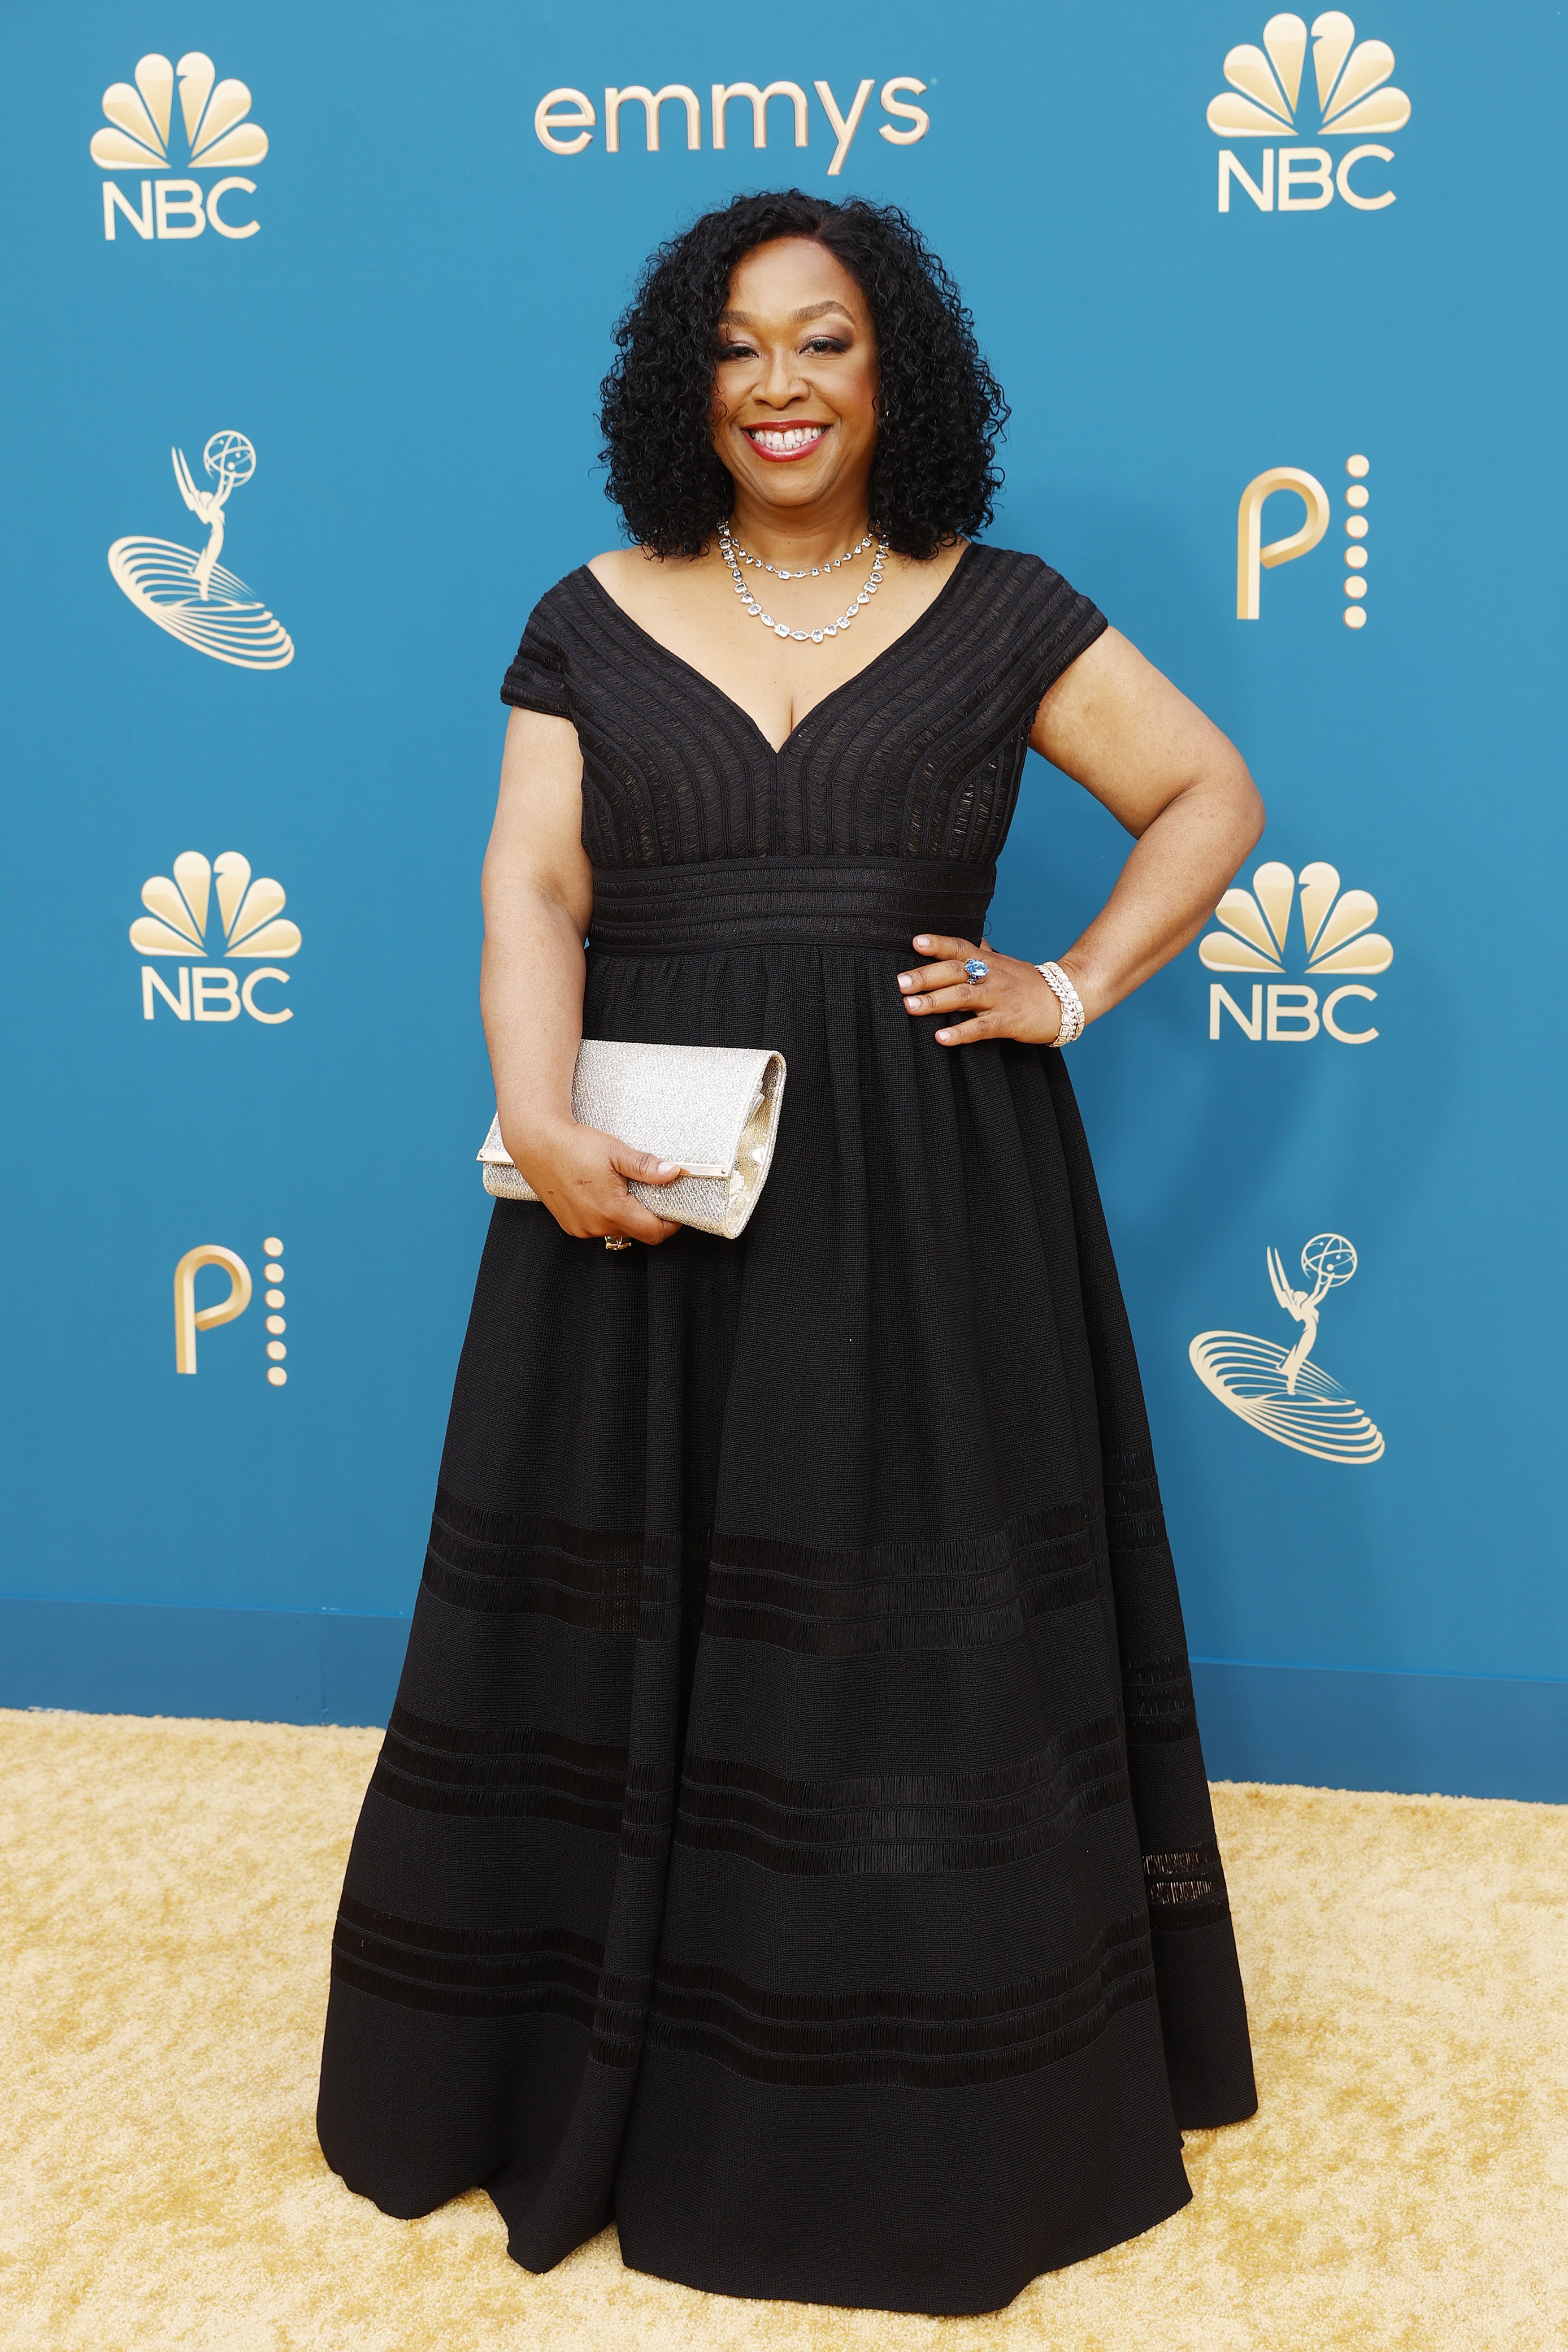 LOS ANGELES, CALIFORNIA - SEPTEMBER 12: 74th ANNUAL PRIMETIME EMMY AWARDS -- Pictured: Shonda Rhimes arrives to the 74th Annual Primetime Emmy Awards held at the Microsoft Theater on September 12, 2022. -- (Photo by Trae Patton/NBC via Getty Images) (Foto: NBC via Getty Images)